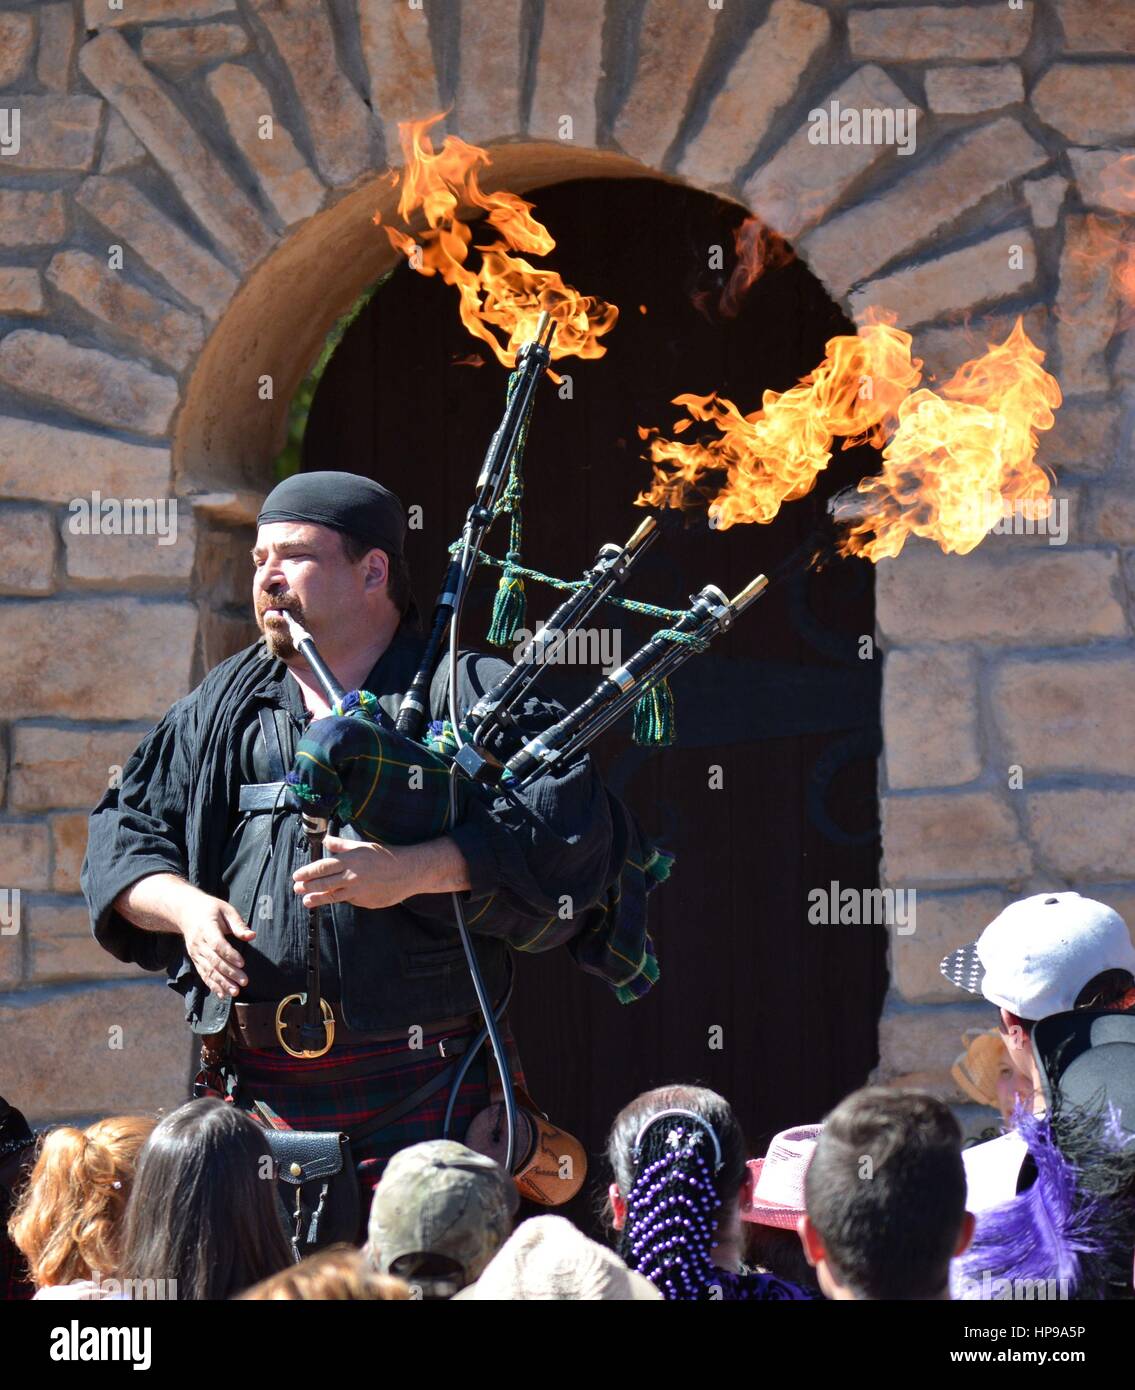 Bagpipe Player with Flames Stock Photo